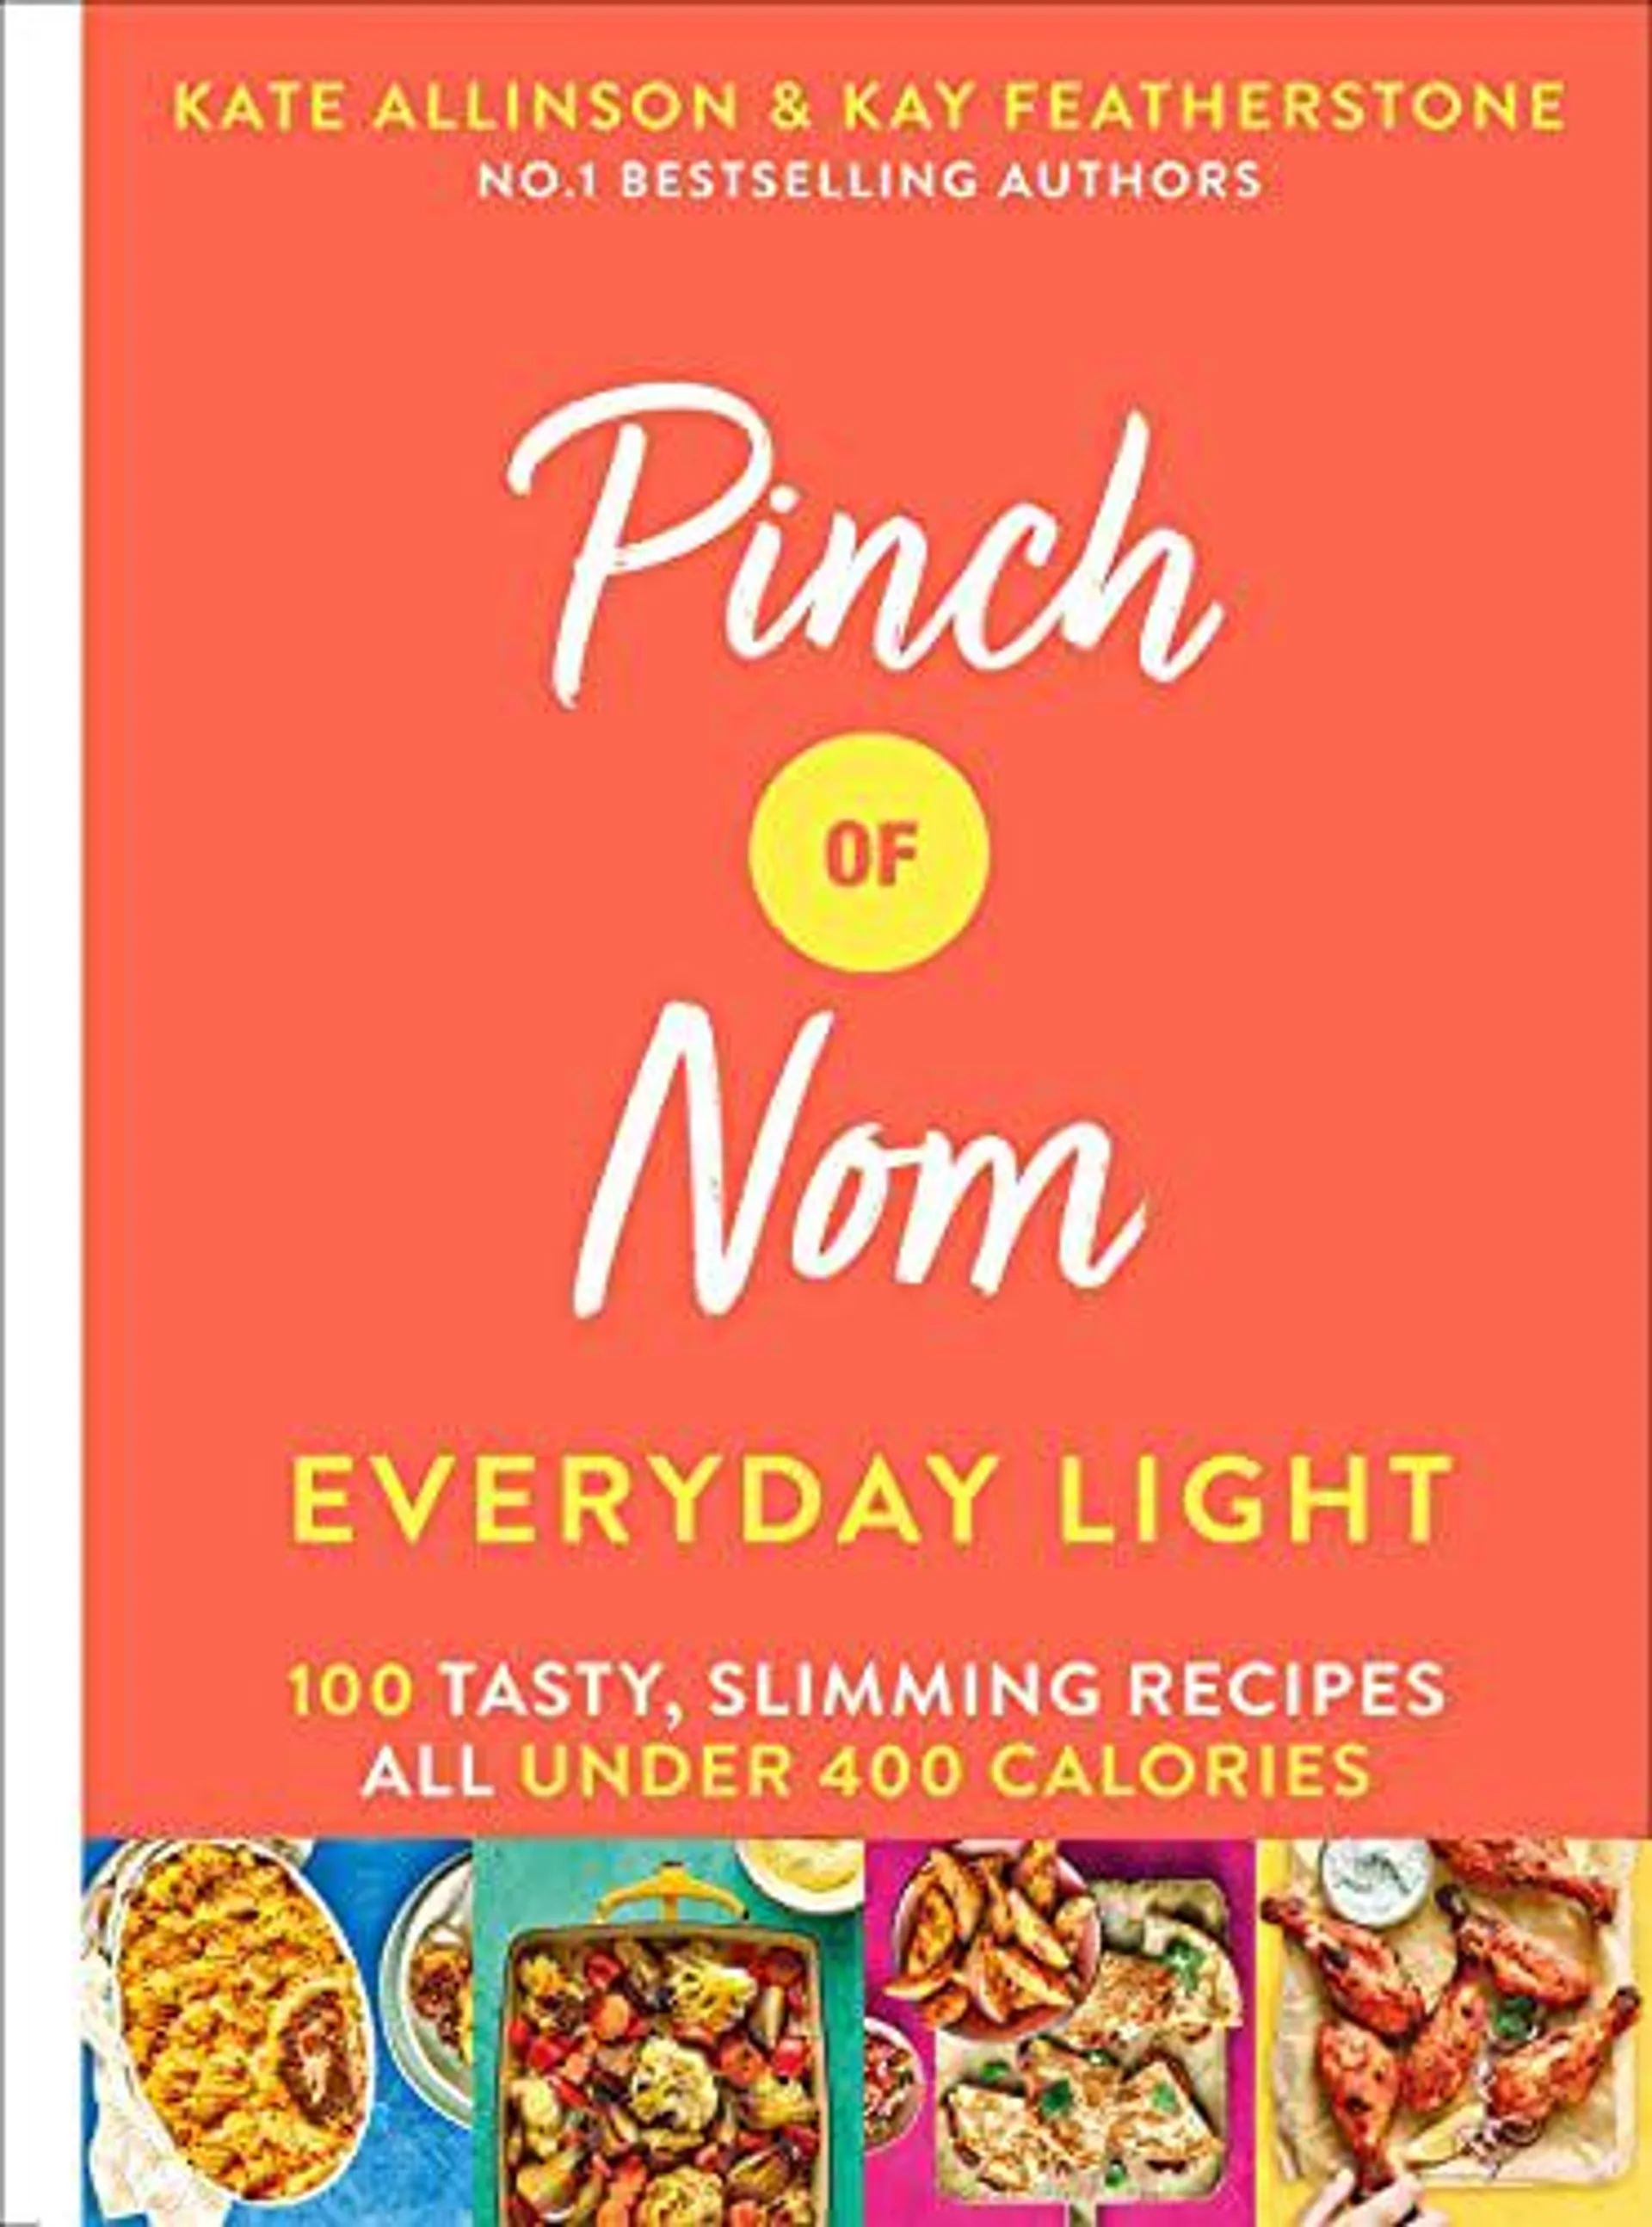 Pinch of Nom Everyday Light by Kay Featherstone